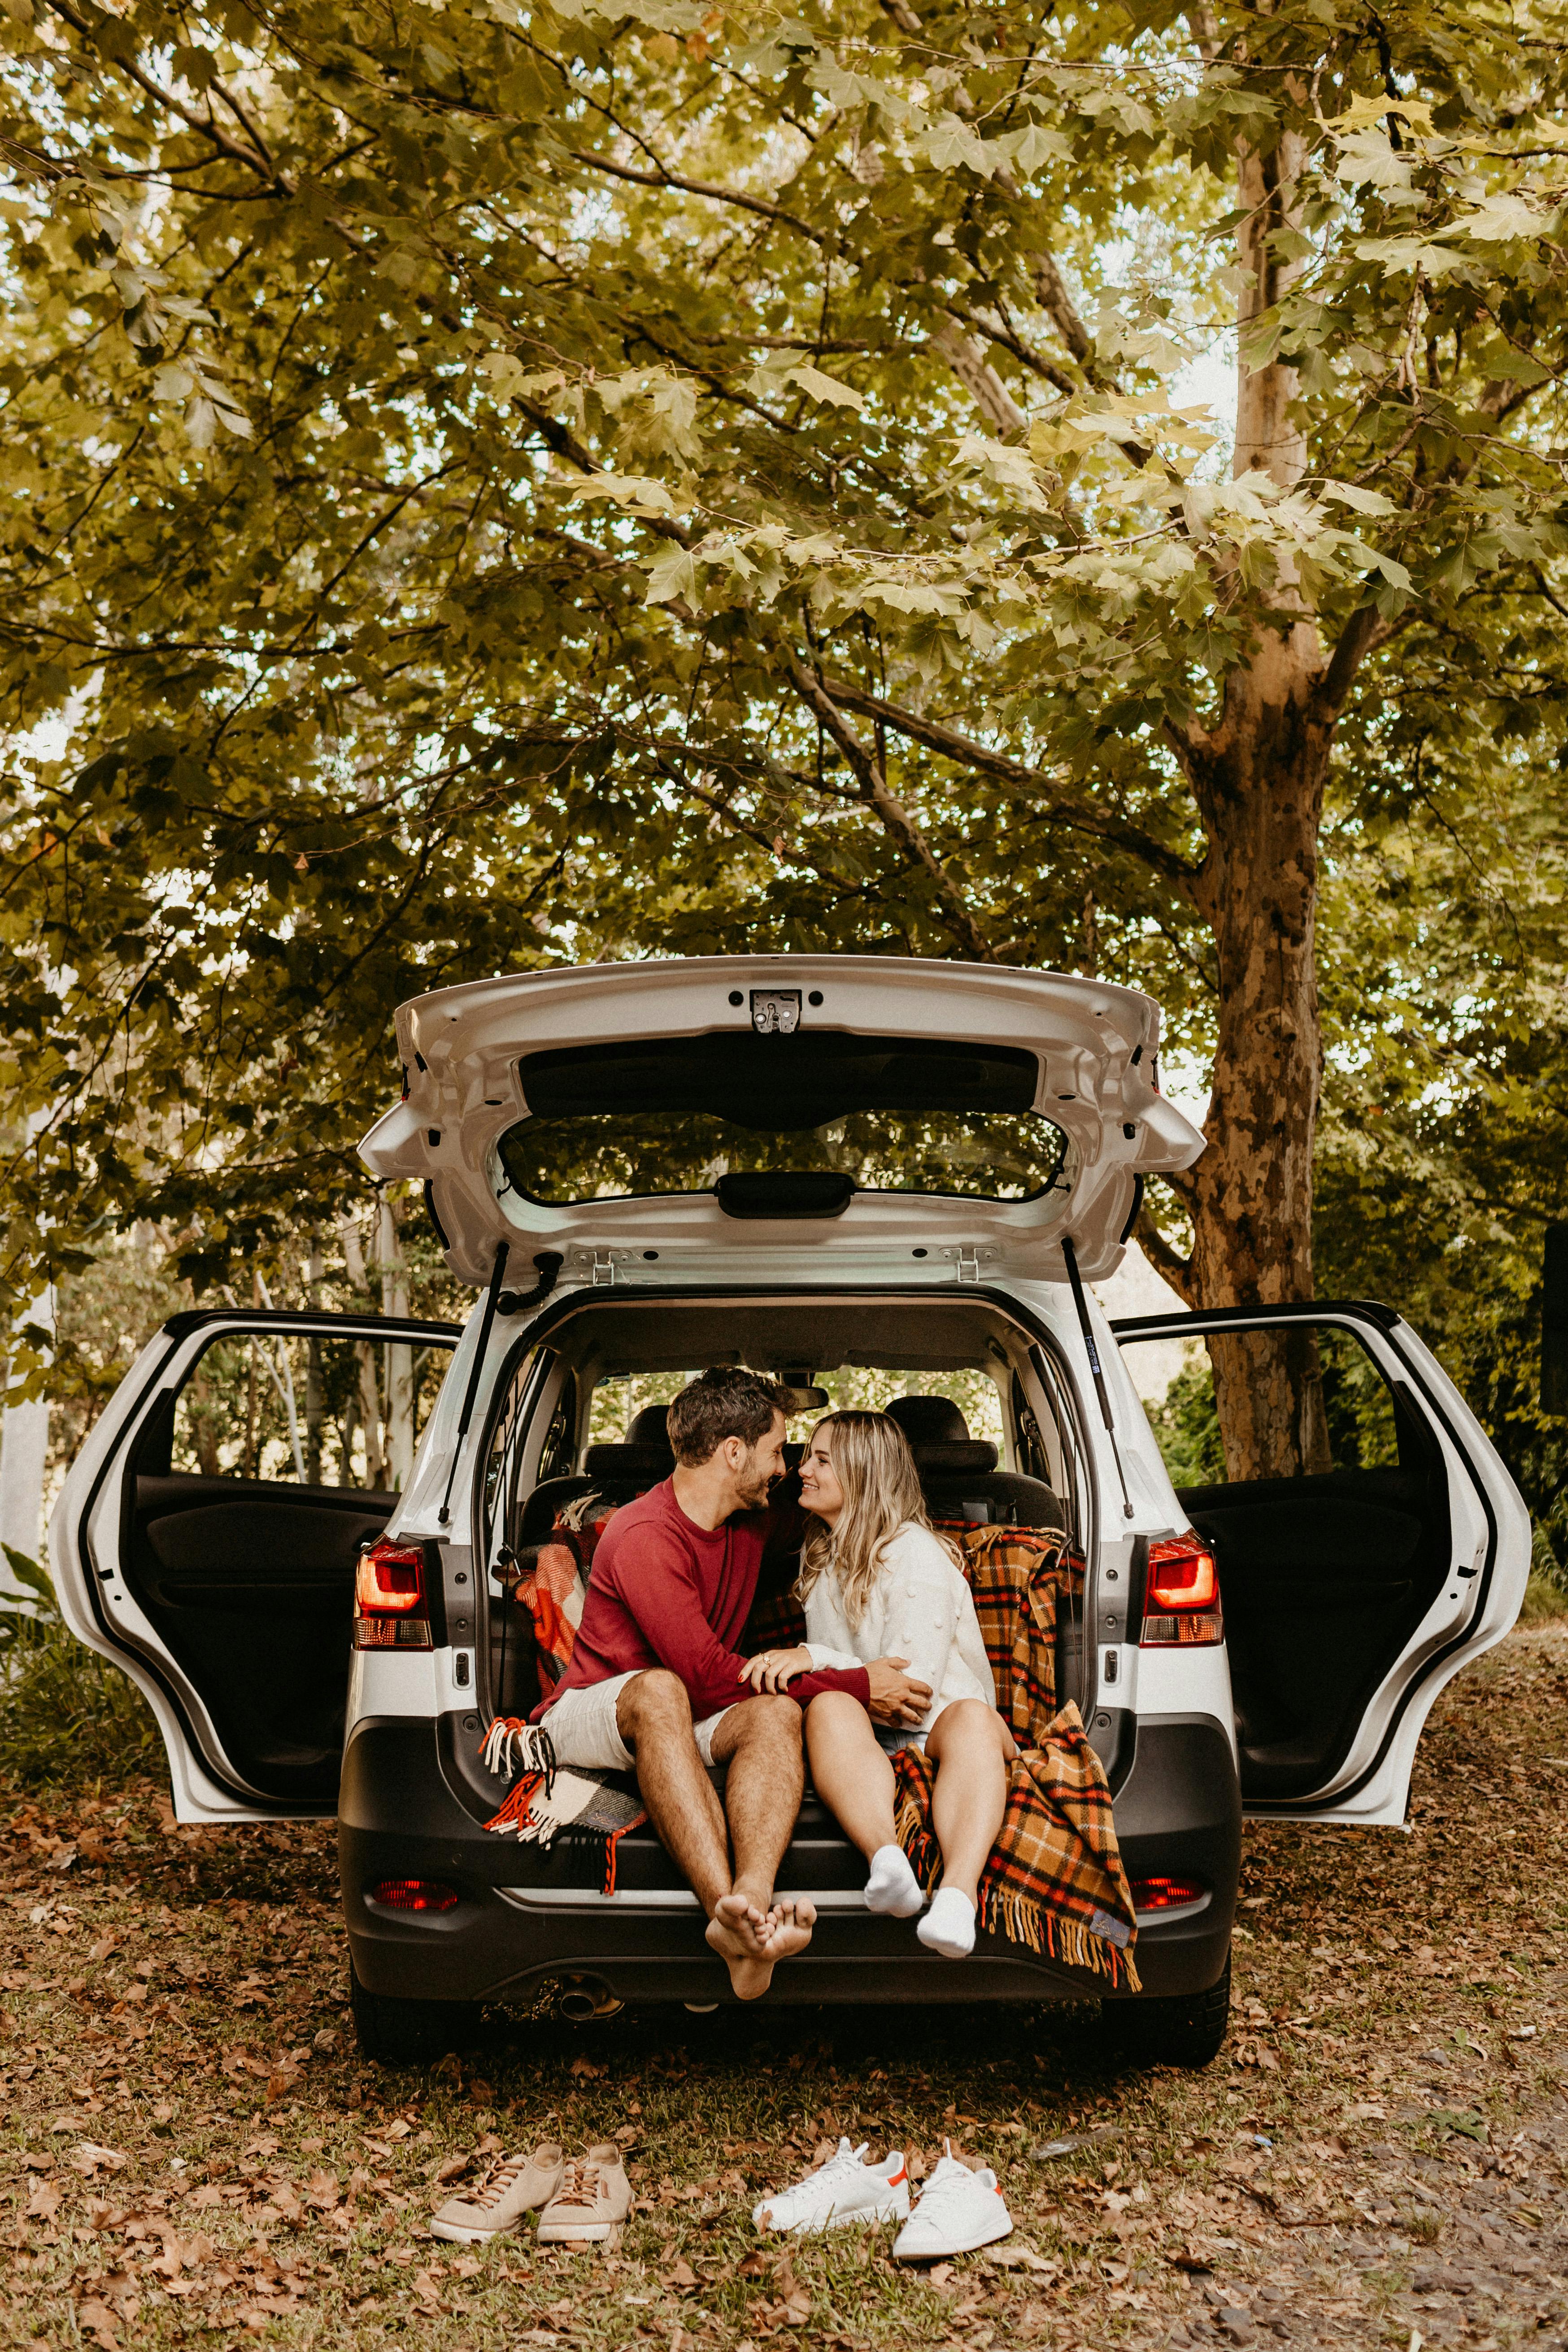 Couple sitting in the back of the car. | Photo: Pexels